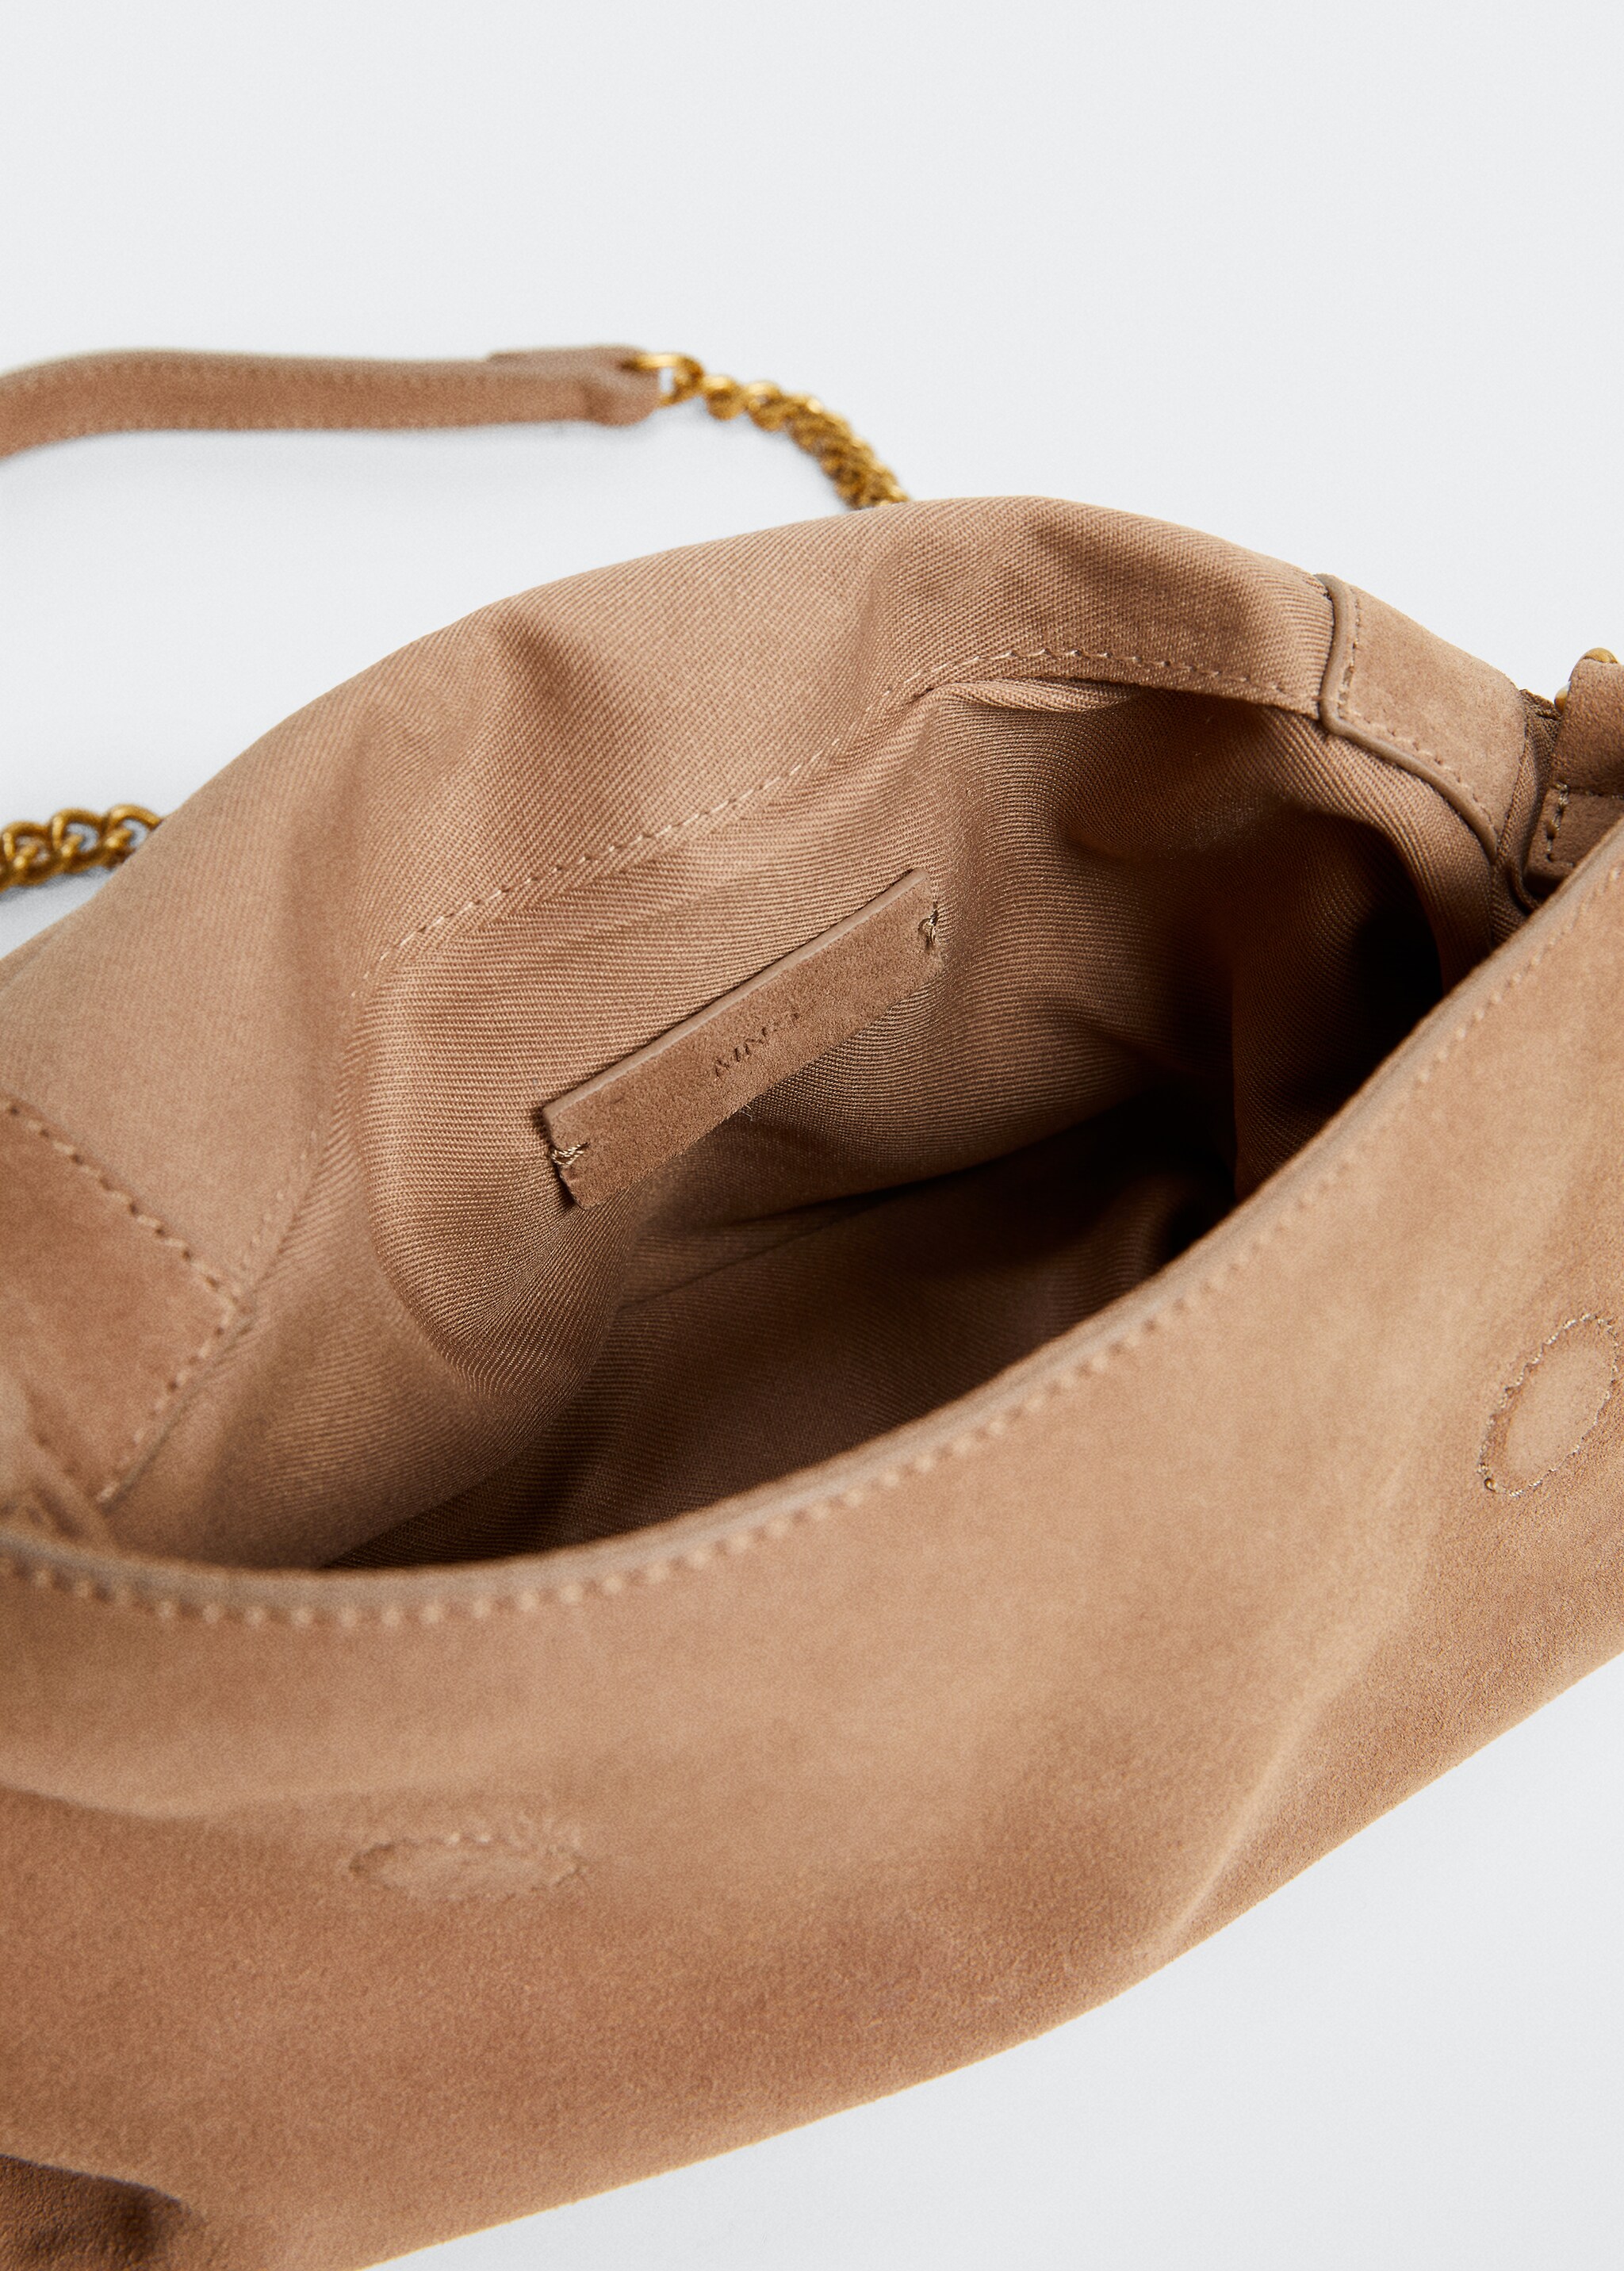 Chain leather bag - Details of the article 1